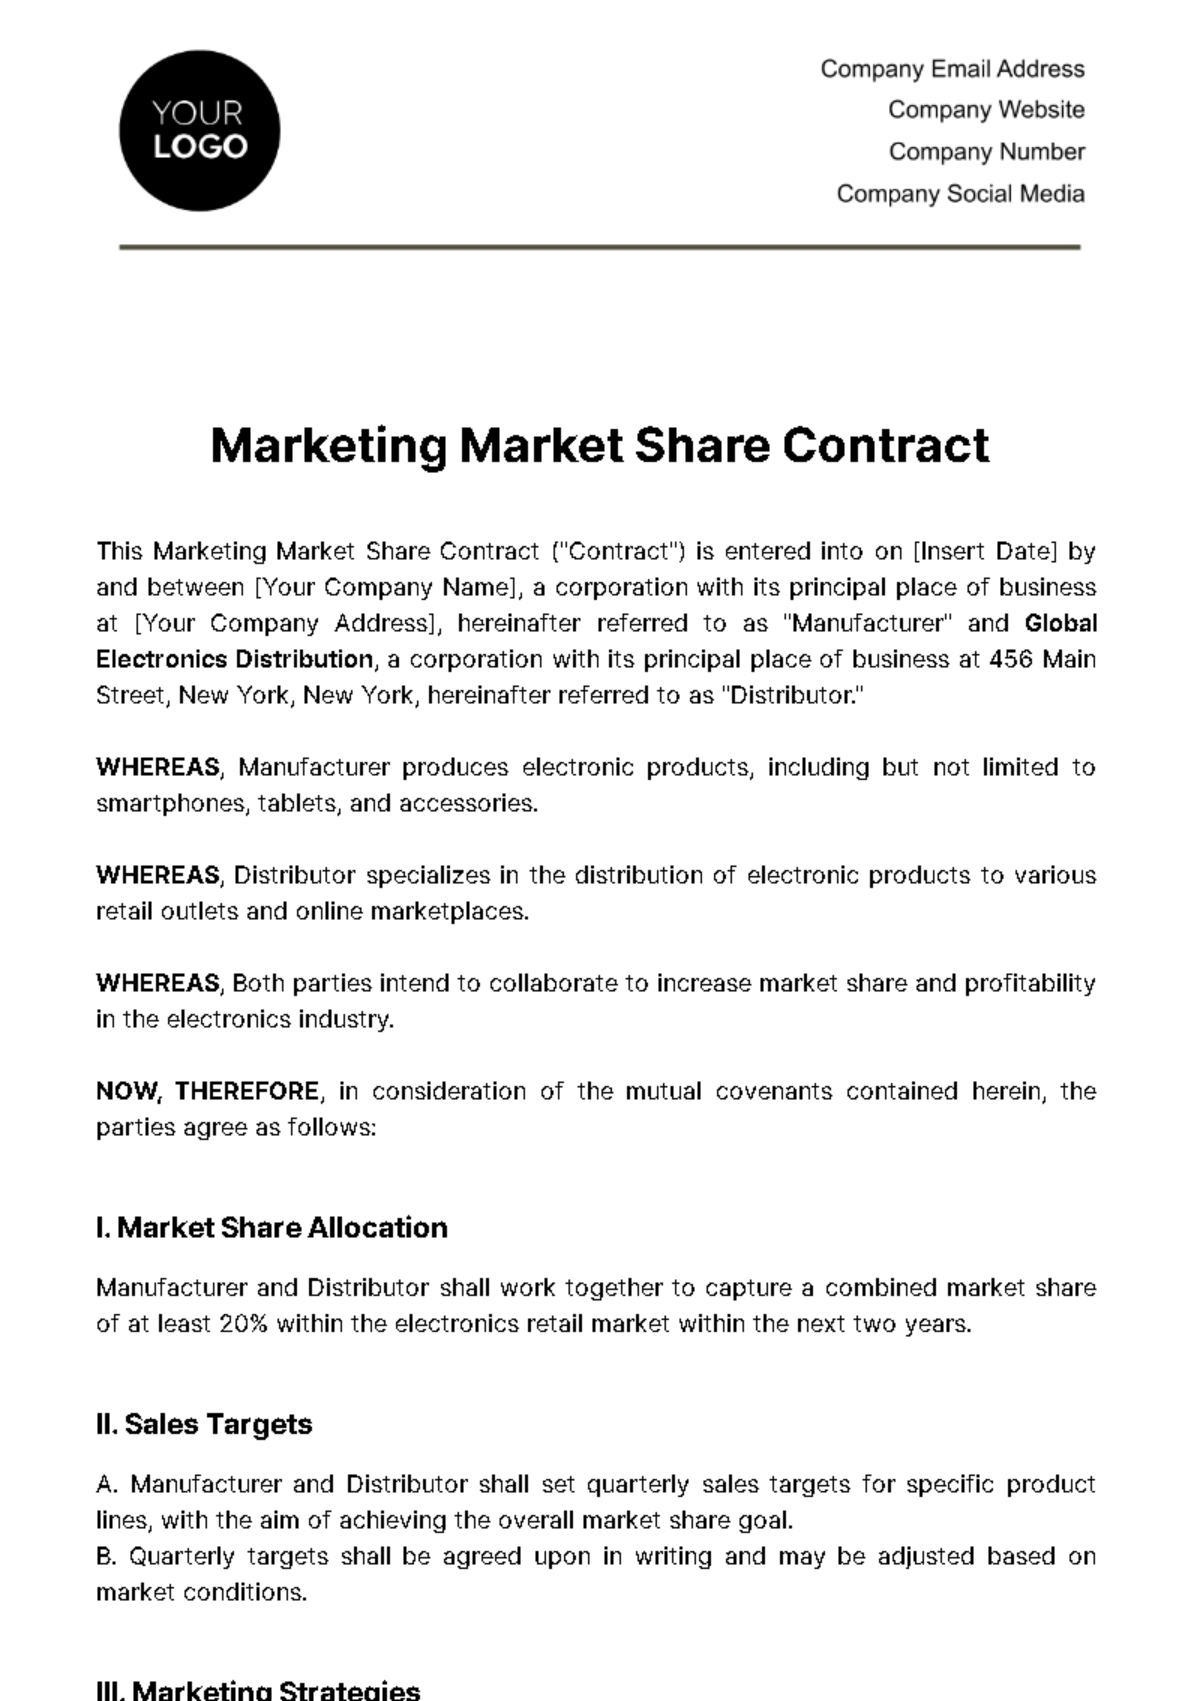 Free Marketing Market Share Contract Template